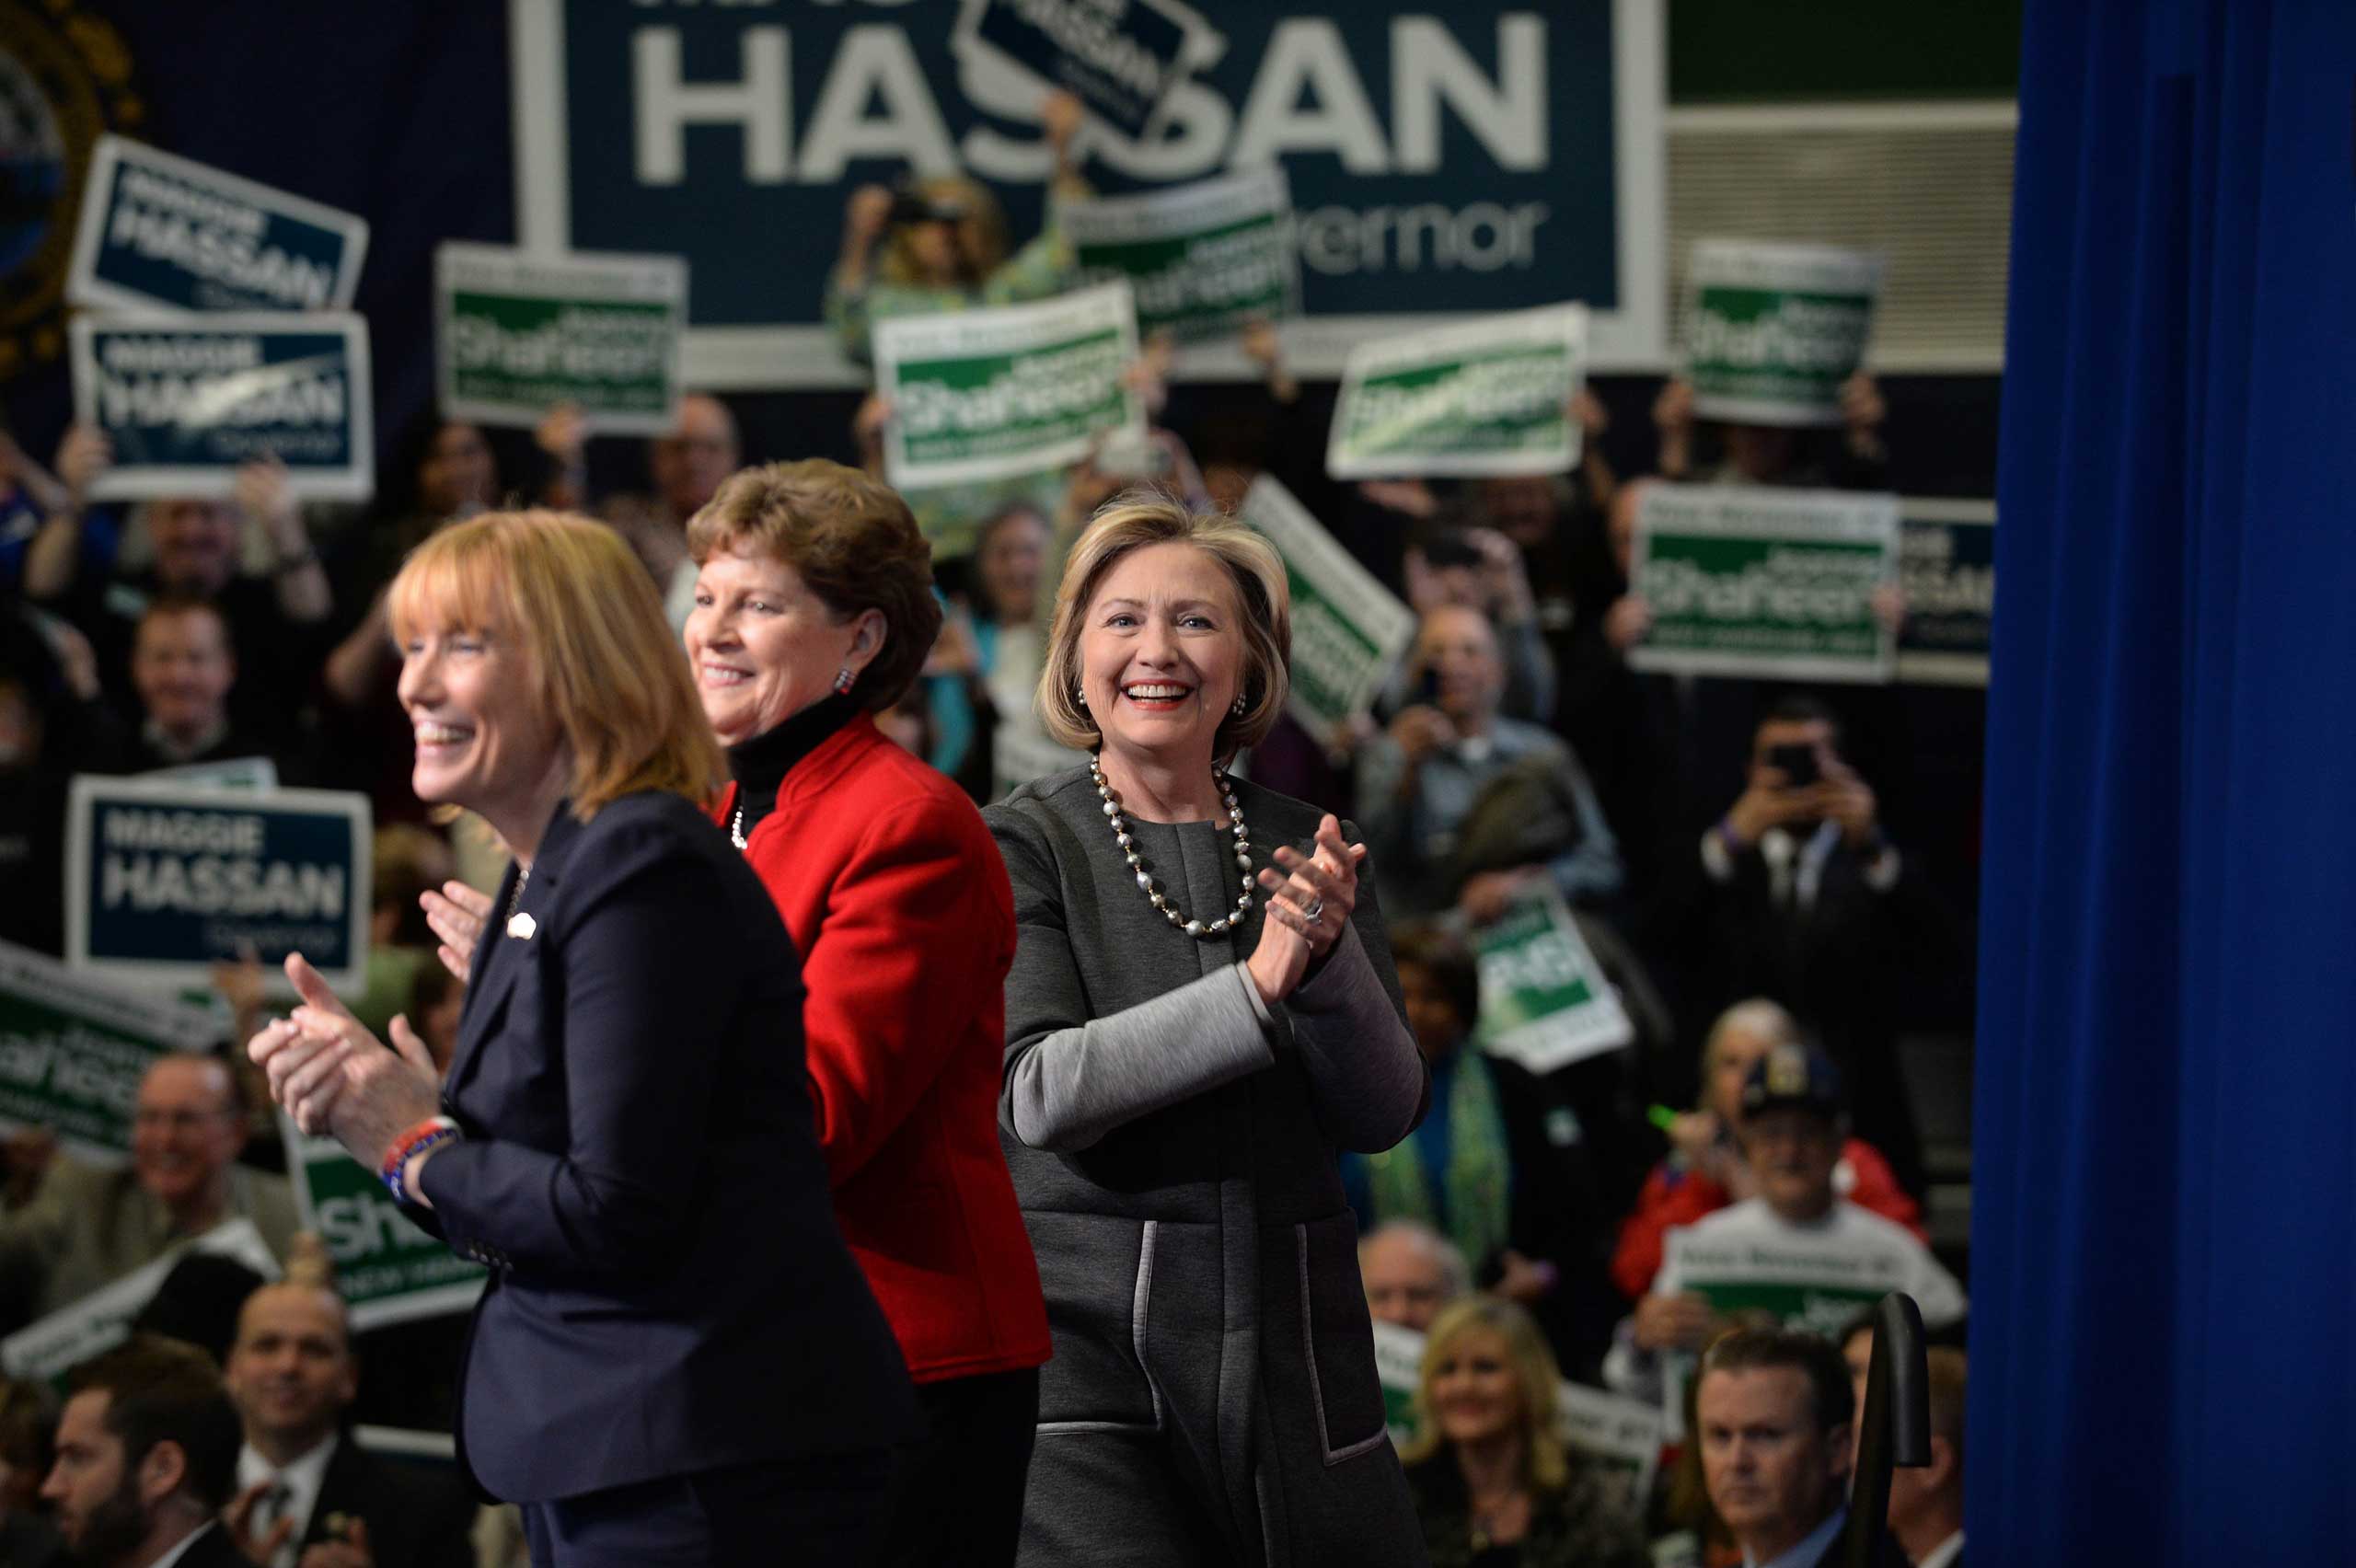 Former U.S. Secretary of State Hillary Clinton (R) campaigns with U.S. Senator Jeanne Shaheen (D-NH) and New Hampshire Governor Maggie Hassan (L) at Nashua Community College in Nashua, N.H. on Nov. 2, 2014. (Darren McCollester—Getty Images)